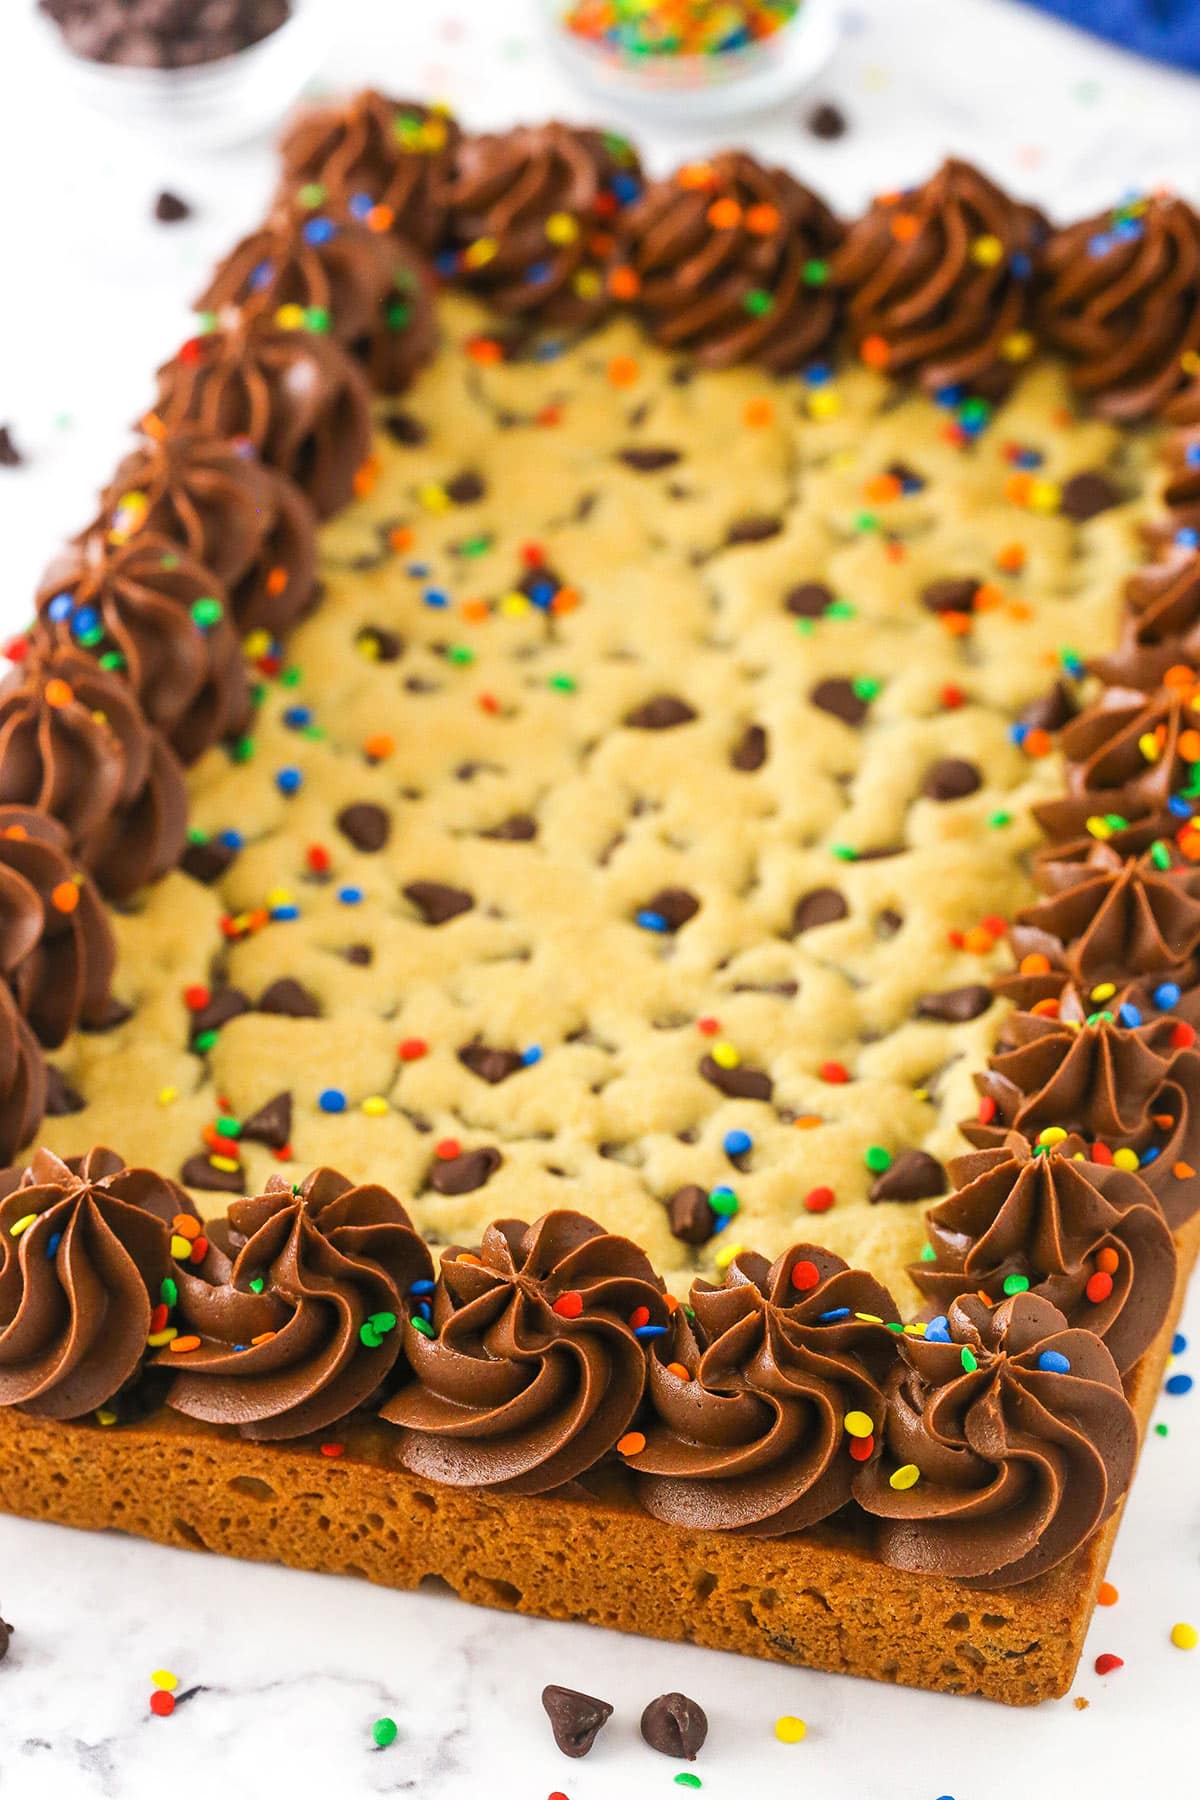 A chocolate chip cookie cake topped with swirls of chocolate frosting around the perimeter